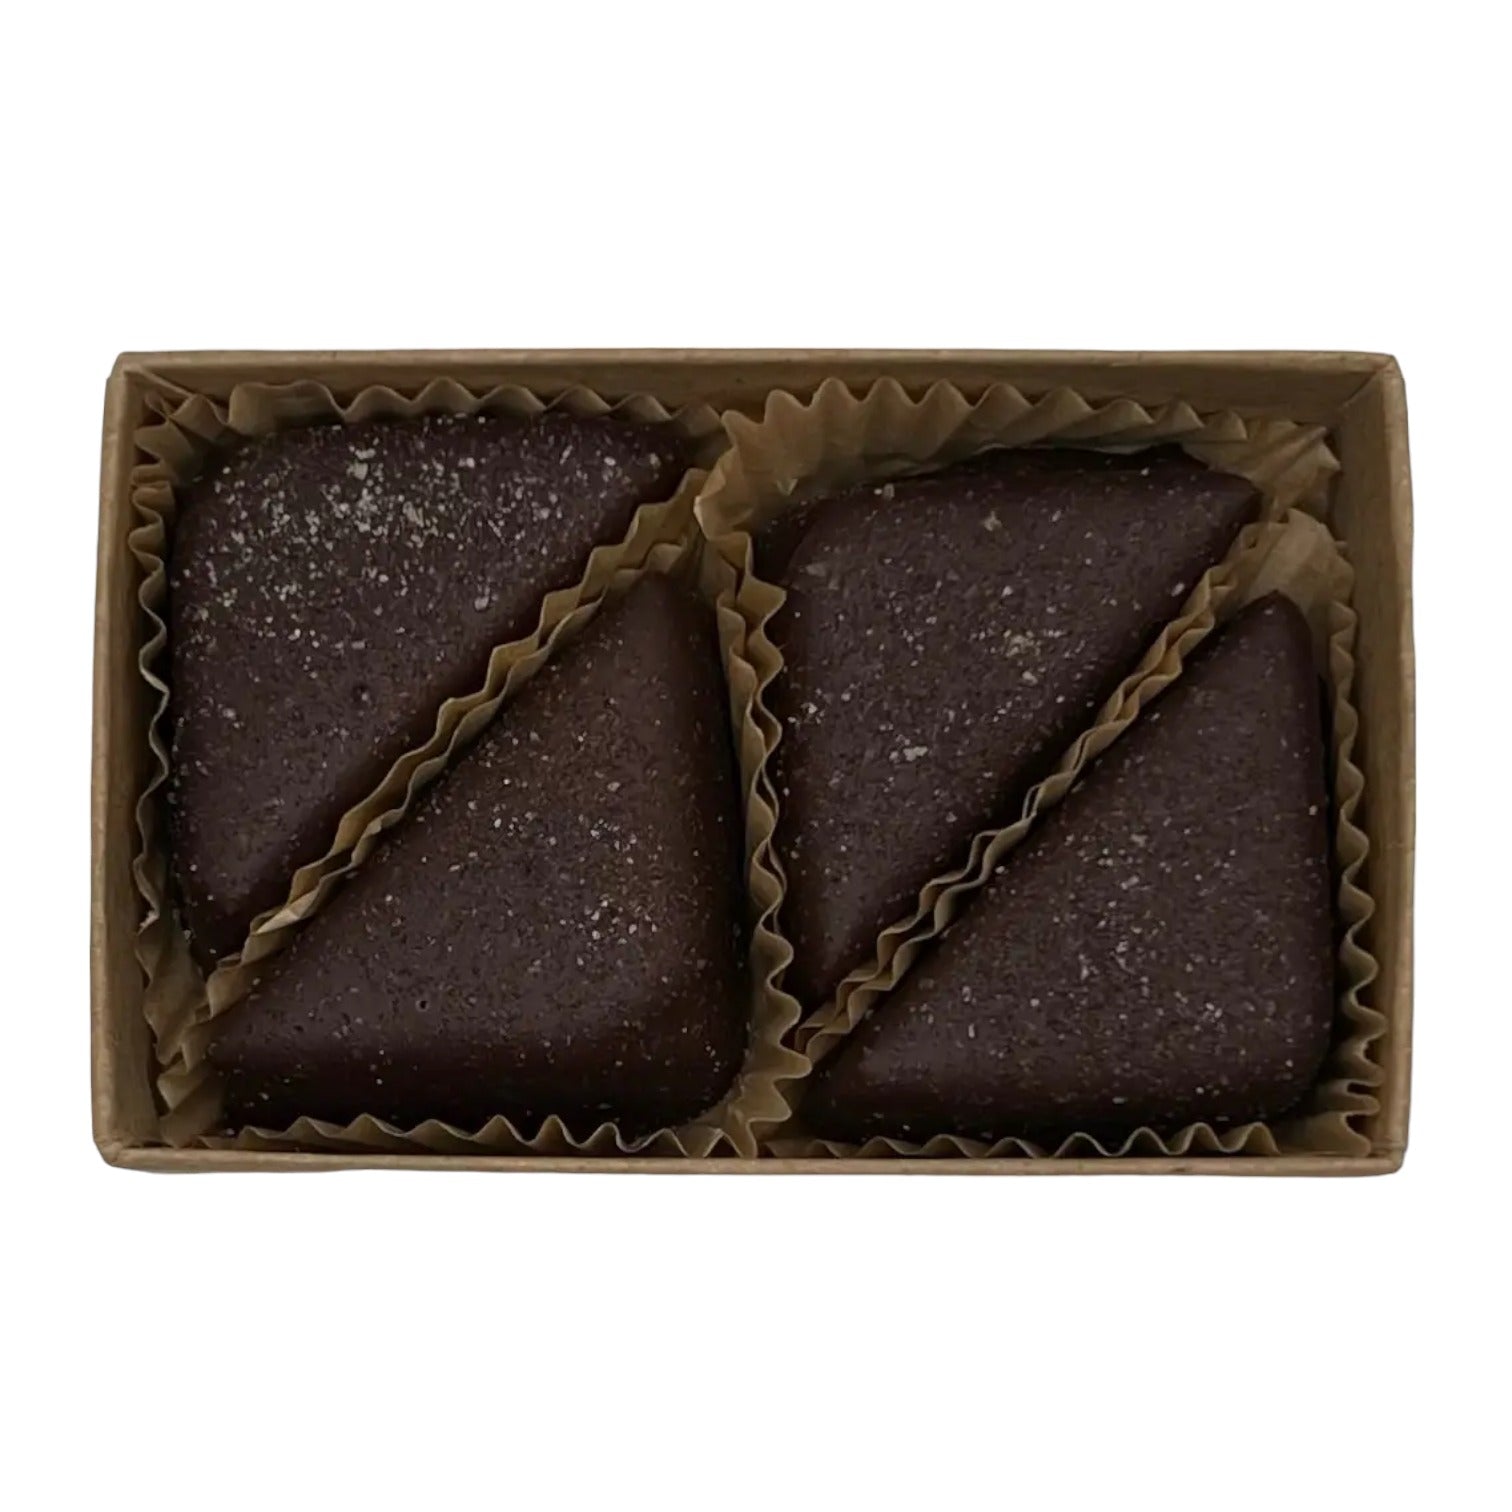 An open box of Vanilla and Salt chocolate truffles from Missionary Chocolates